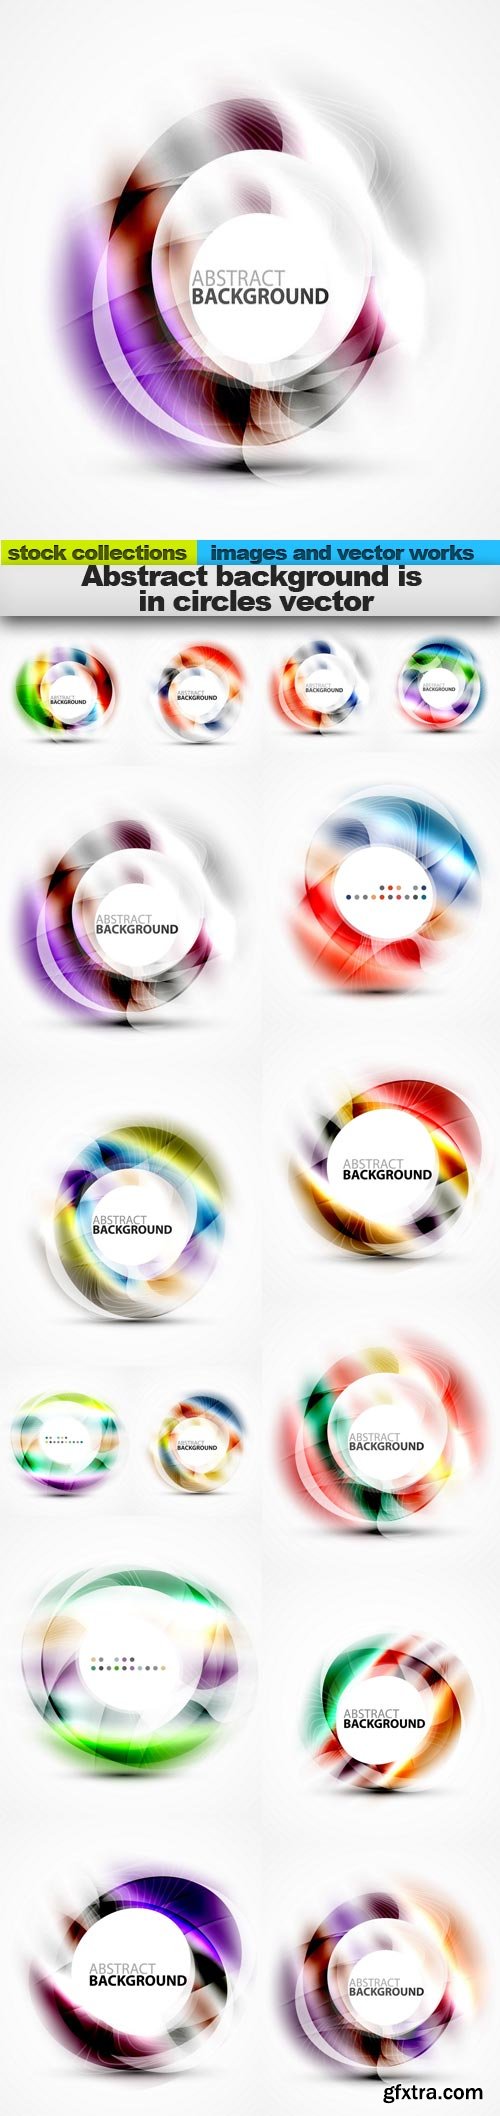 Abstract background is in circles vector, 15 x EPS